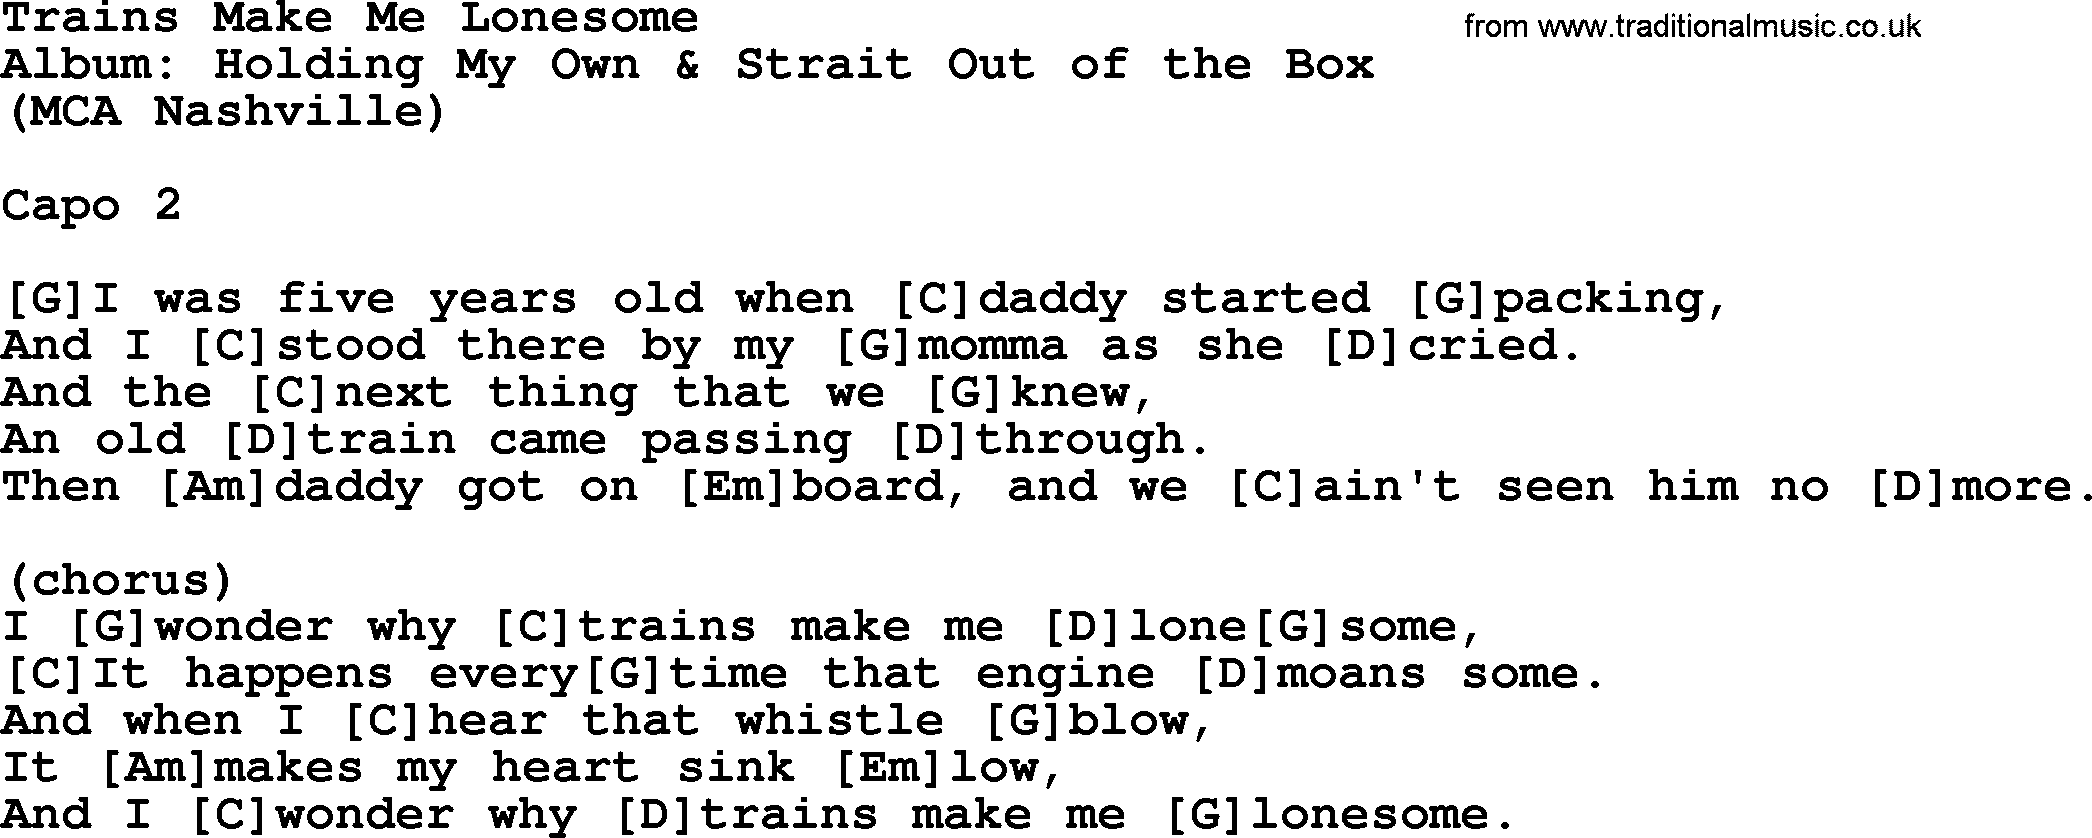 George Strait song: Trains Make Me Lonesome, lyrics and chords